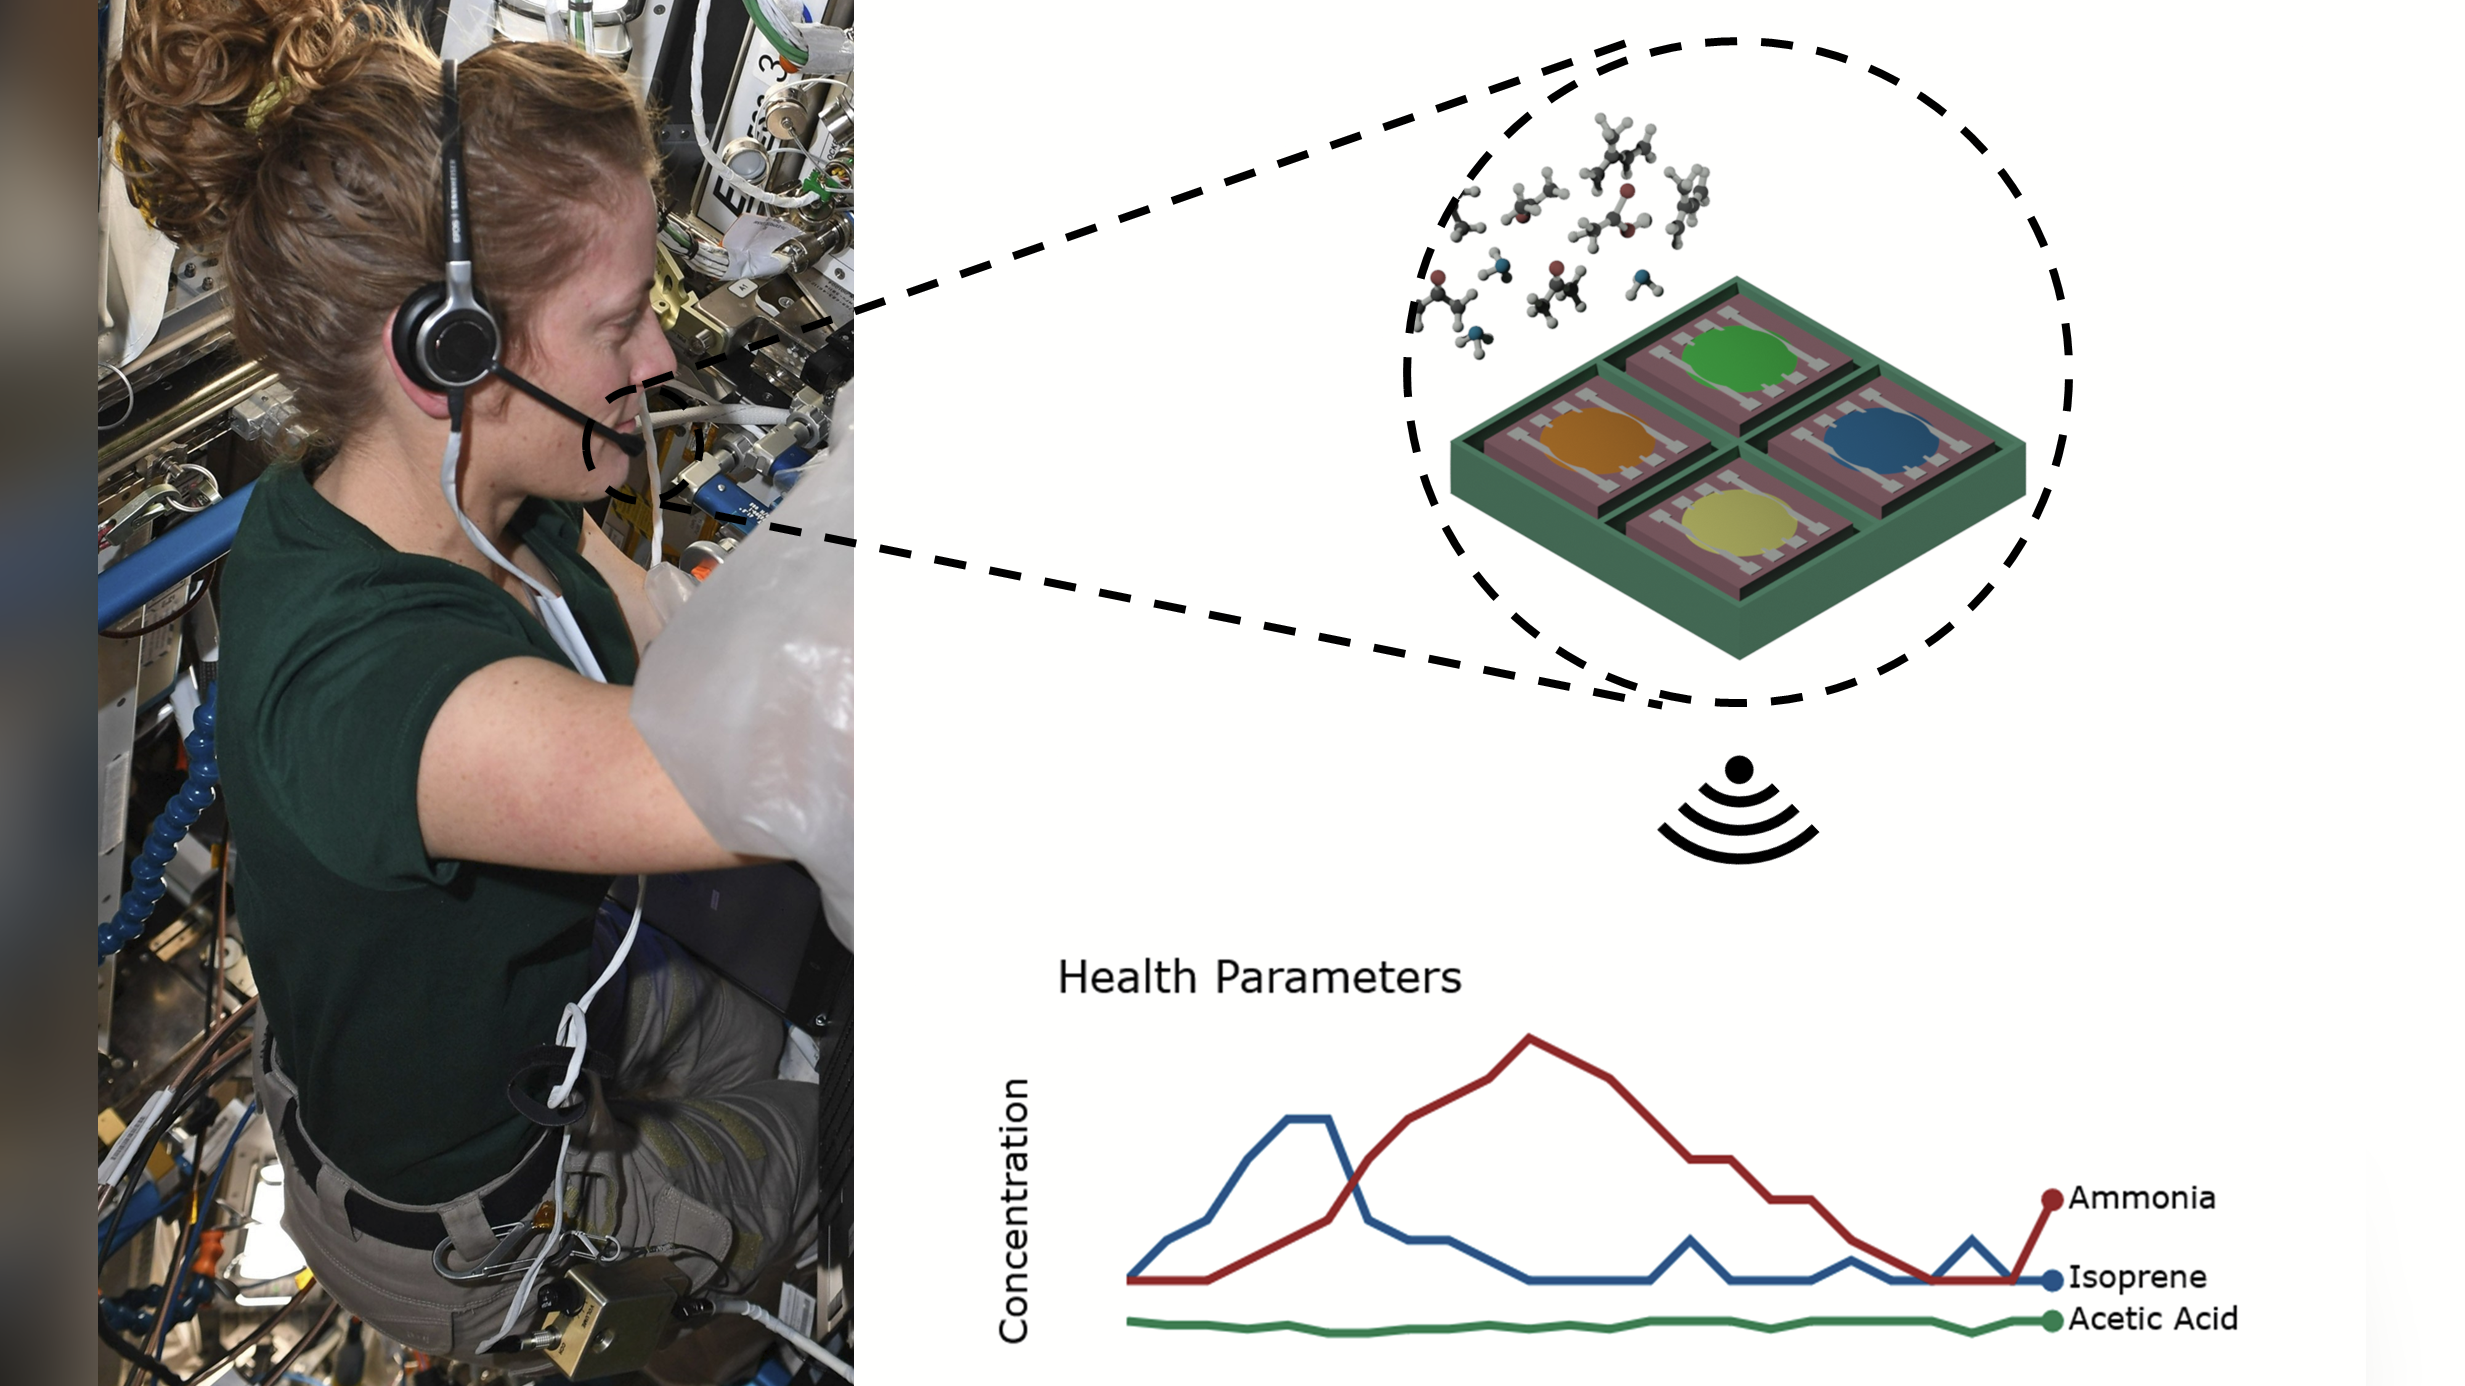 Contact-free biomarker detection during space missions for remote astronaut health monitoring